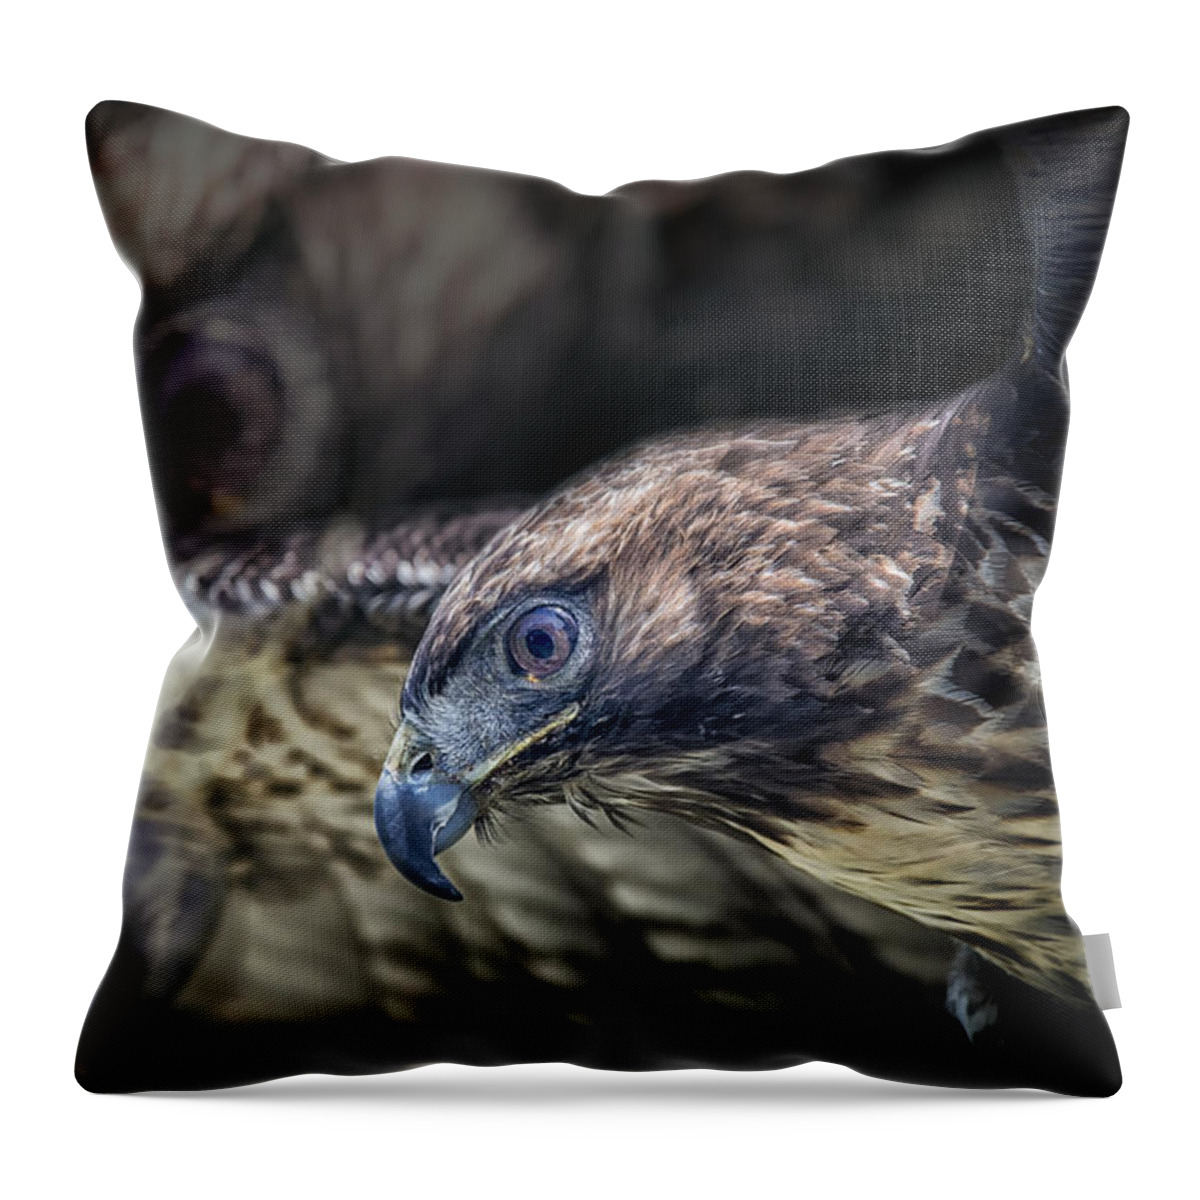 Crystal Yingling Throw Pillow featuring the photograph Shadows by Ghostwinds Photography